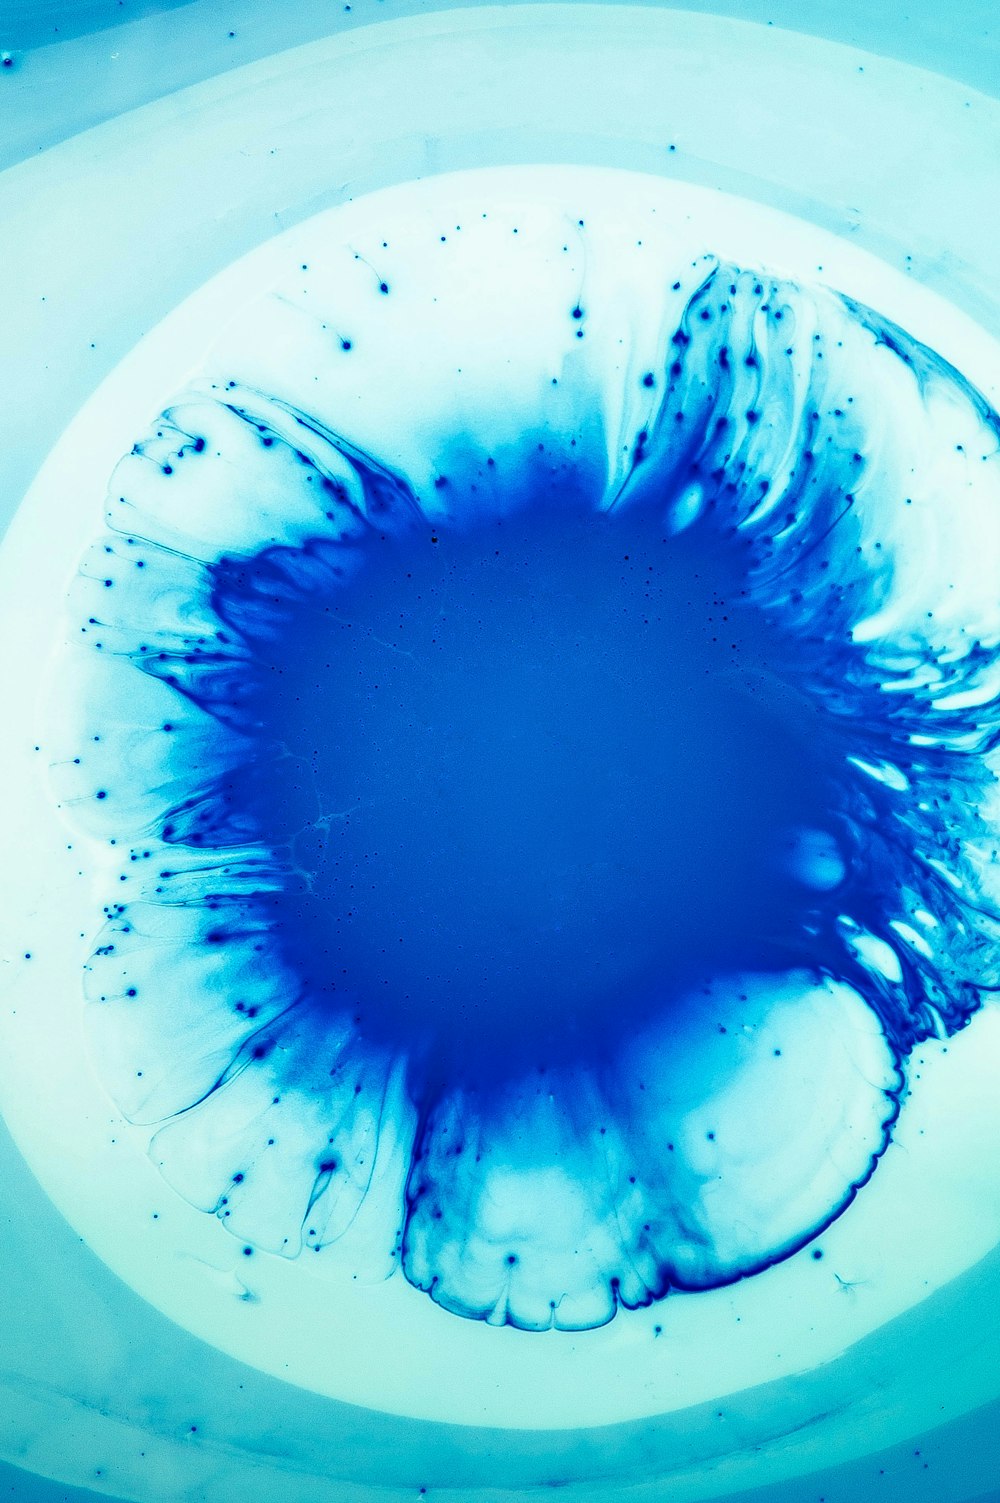 a blue substance floating in a bowl of water